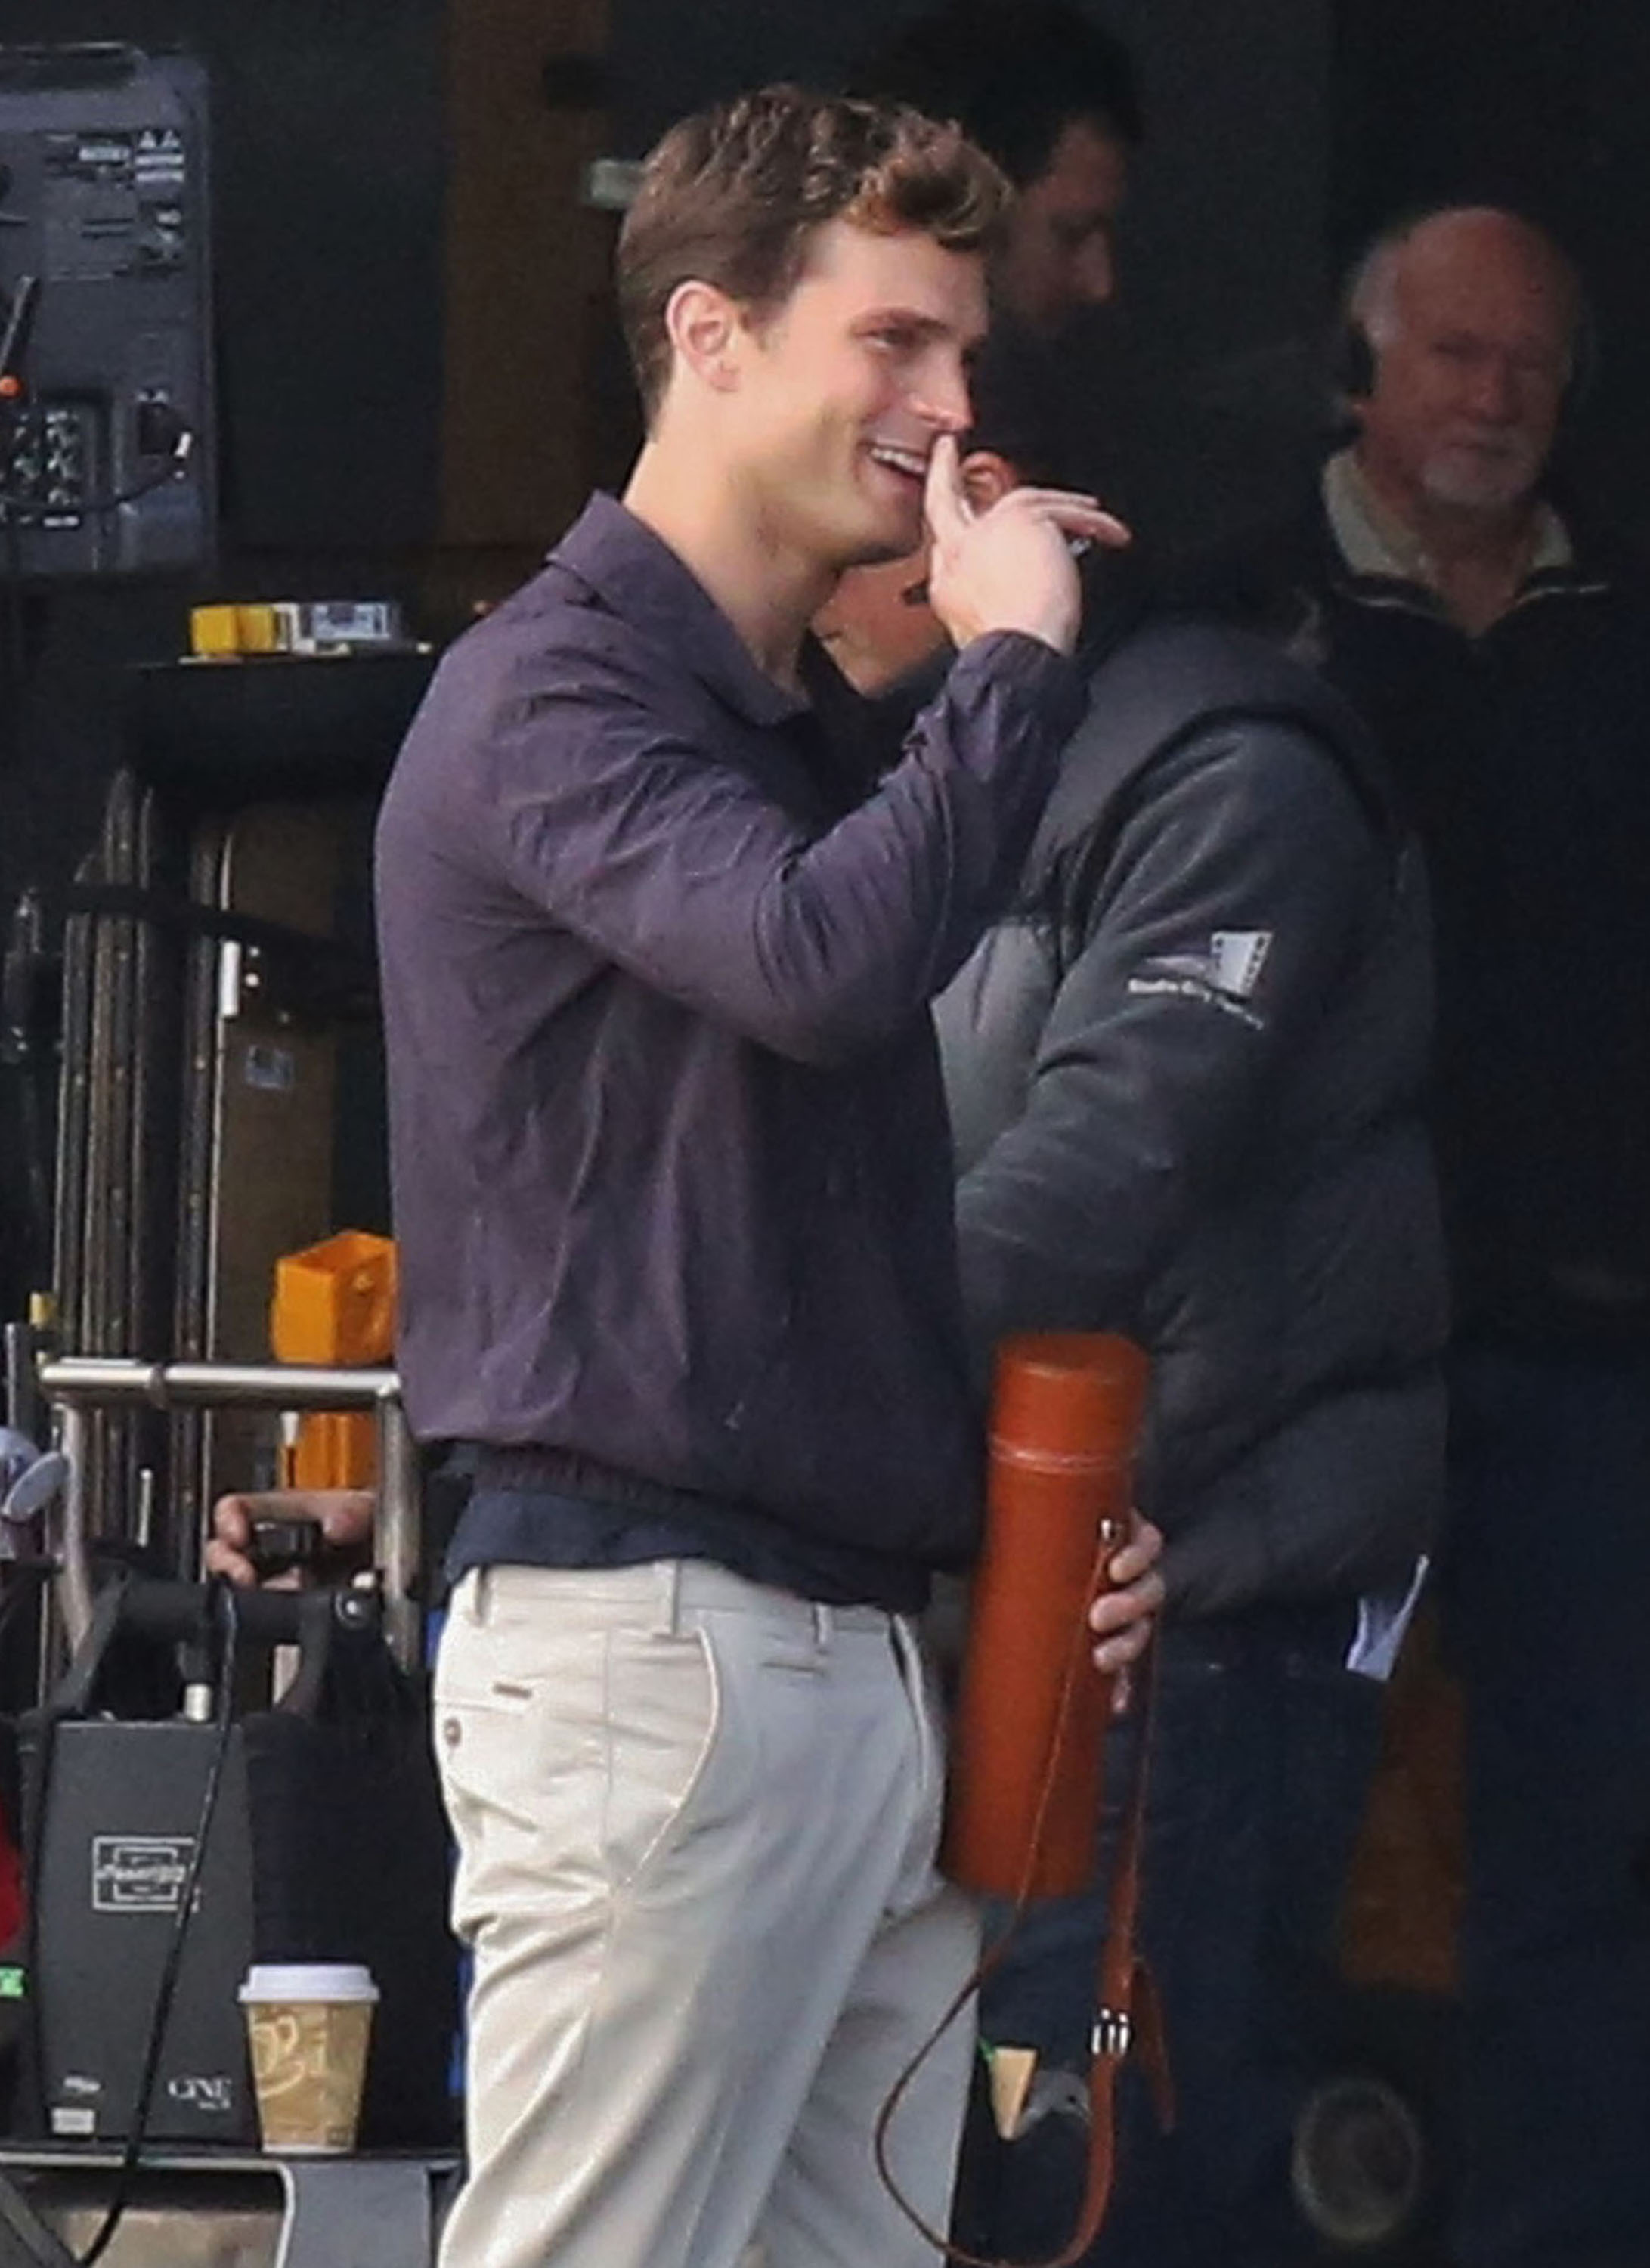 Your Afternoon Man: Jamie Dornan Doing “50 Shades of Grey” Reshoots